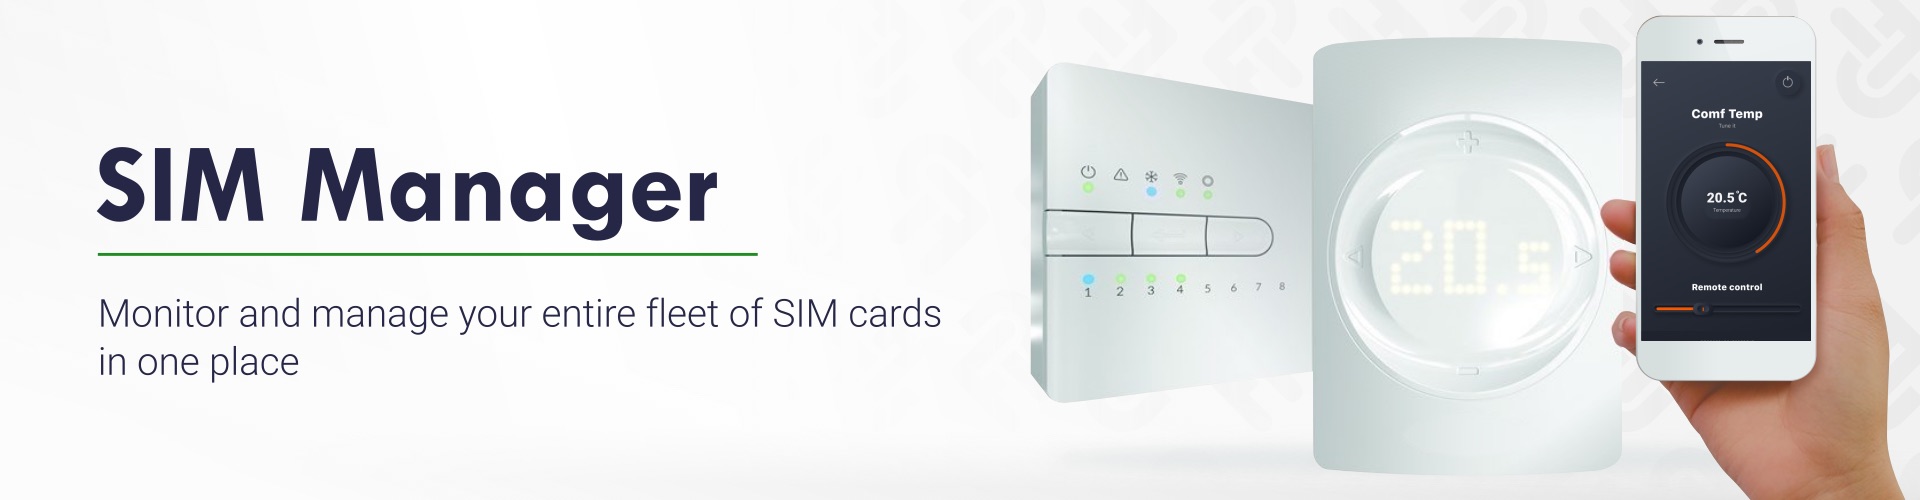 Monitor airtime and data on simcards - Fleet management software